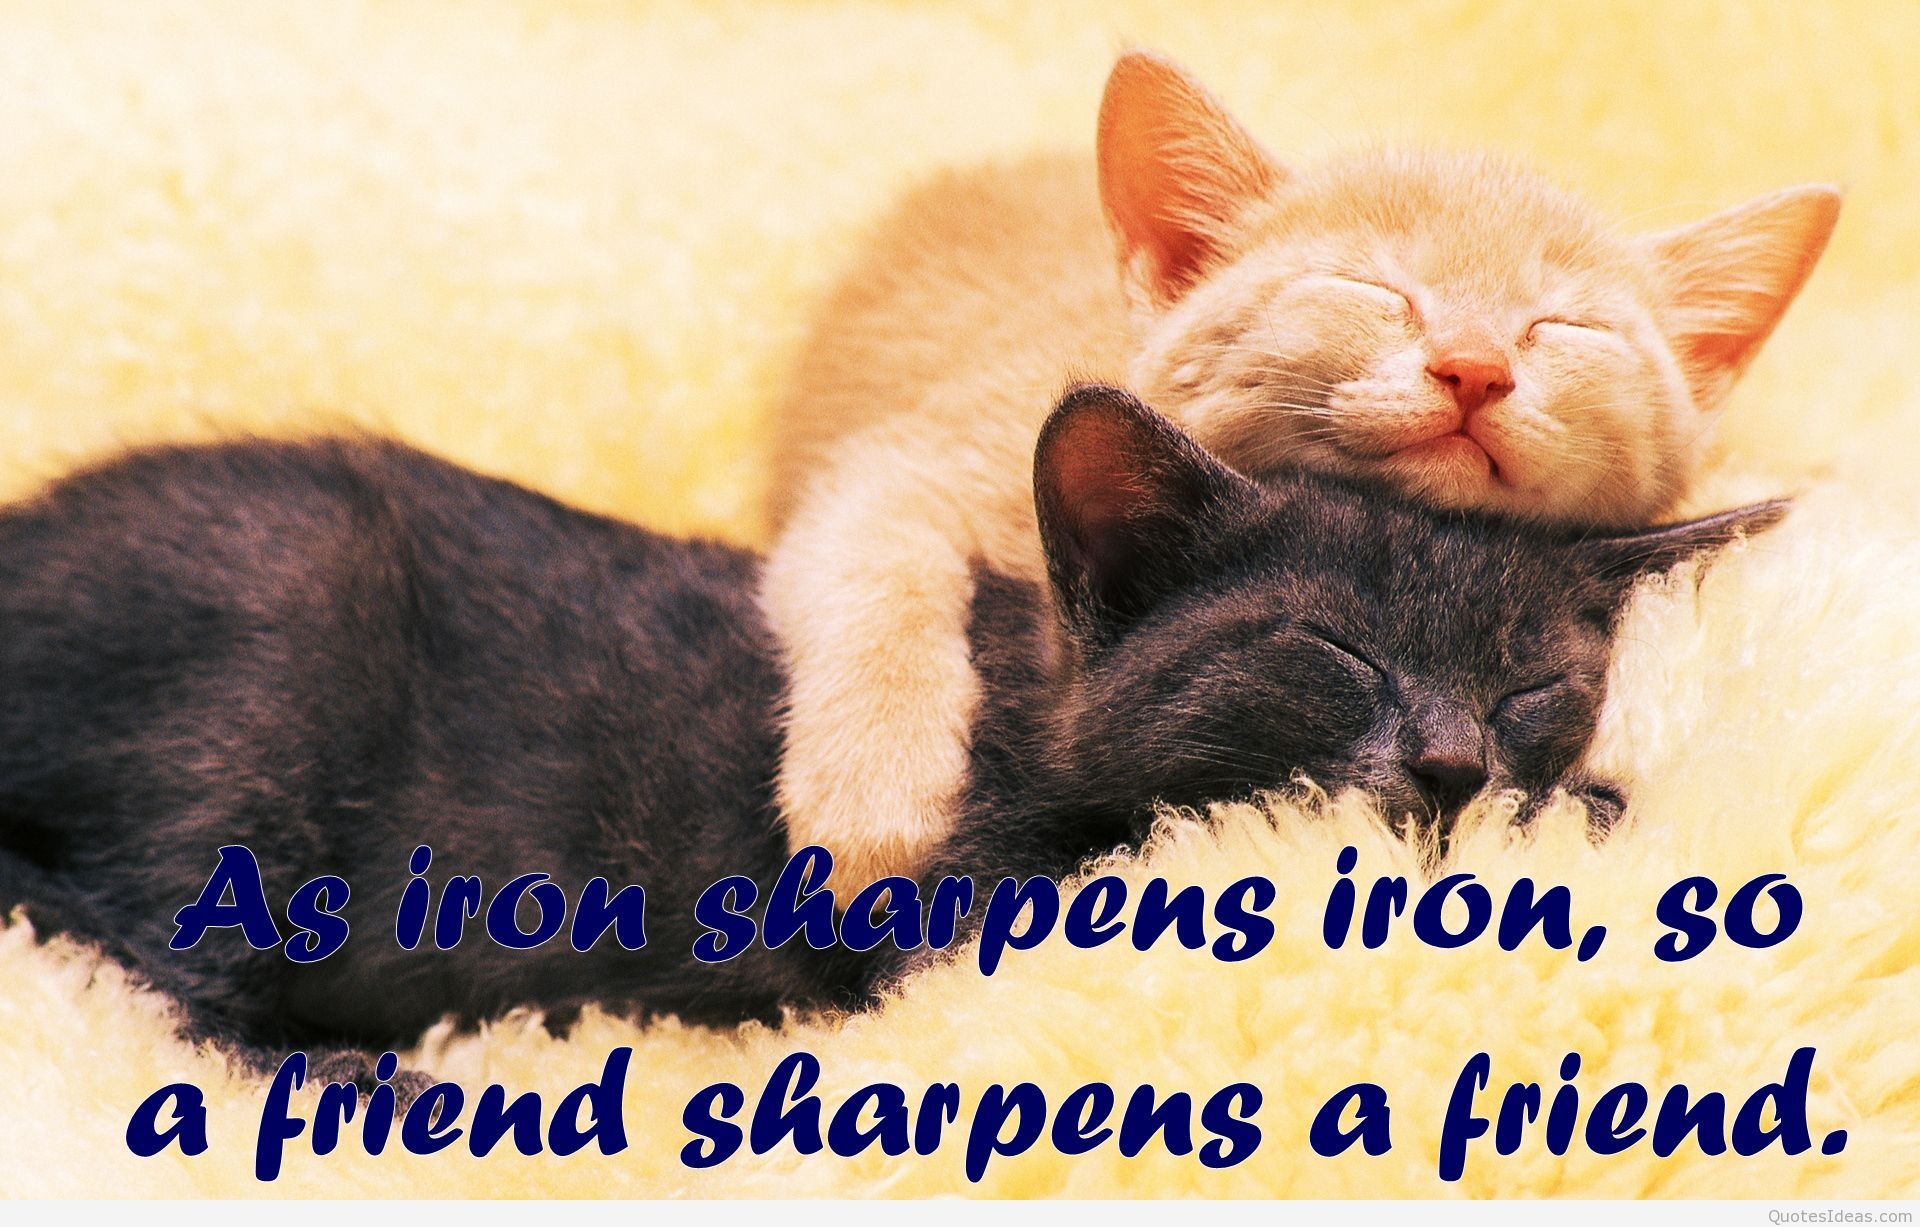 Best-friend-quote-for-my-friends-cats-wallpaper.jpg